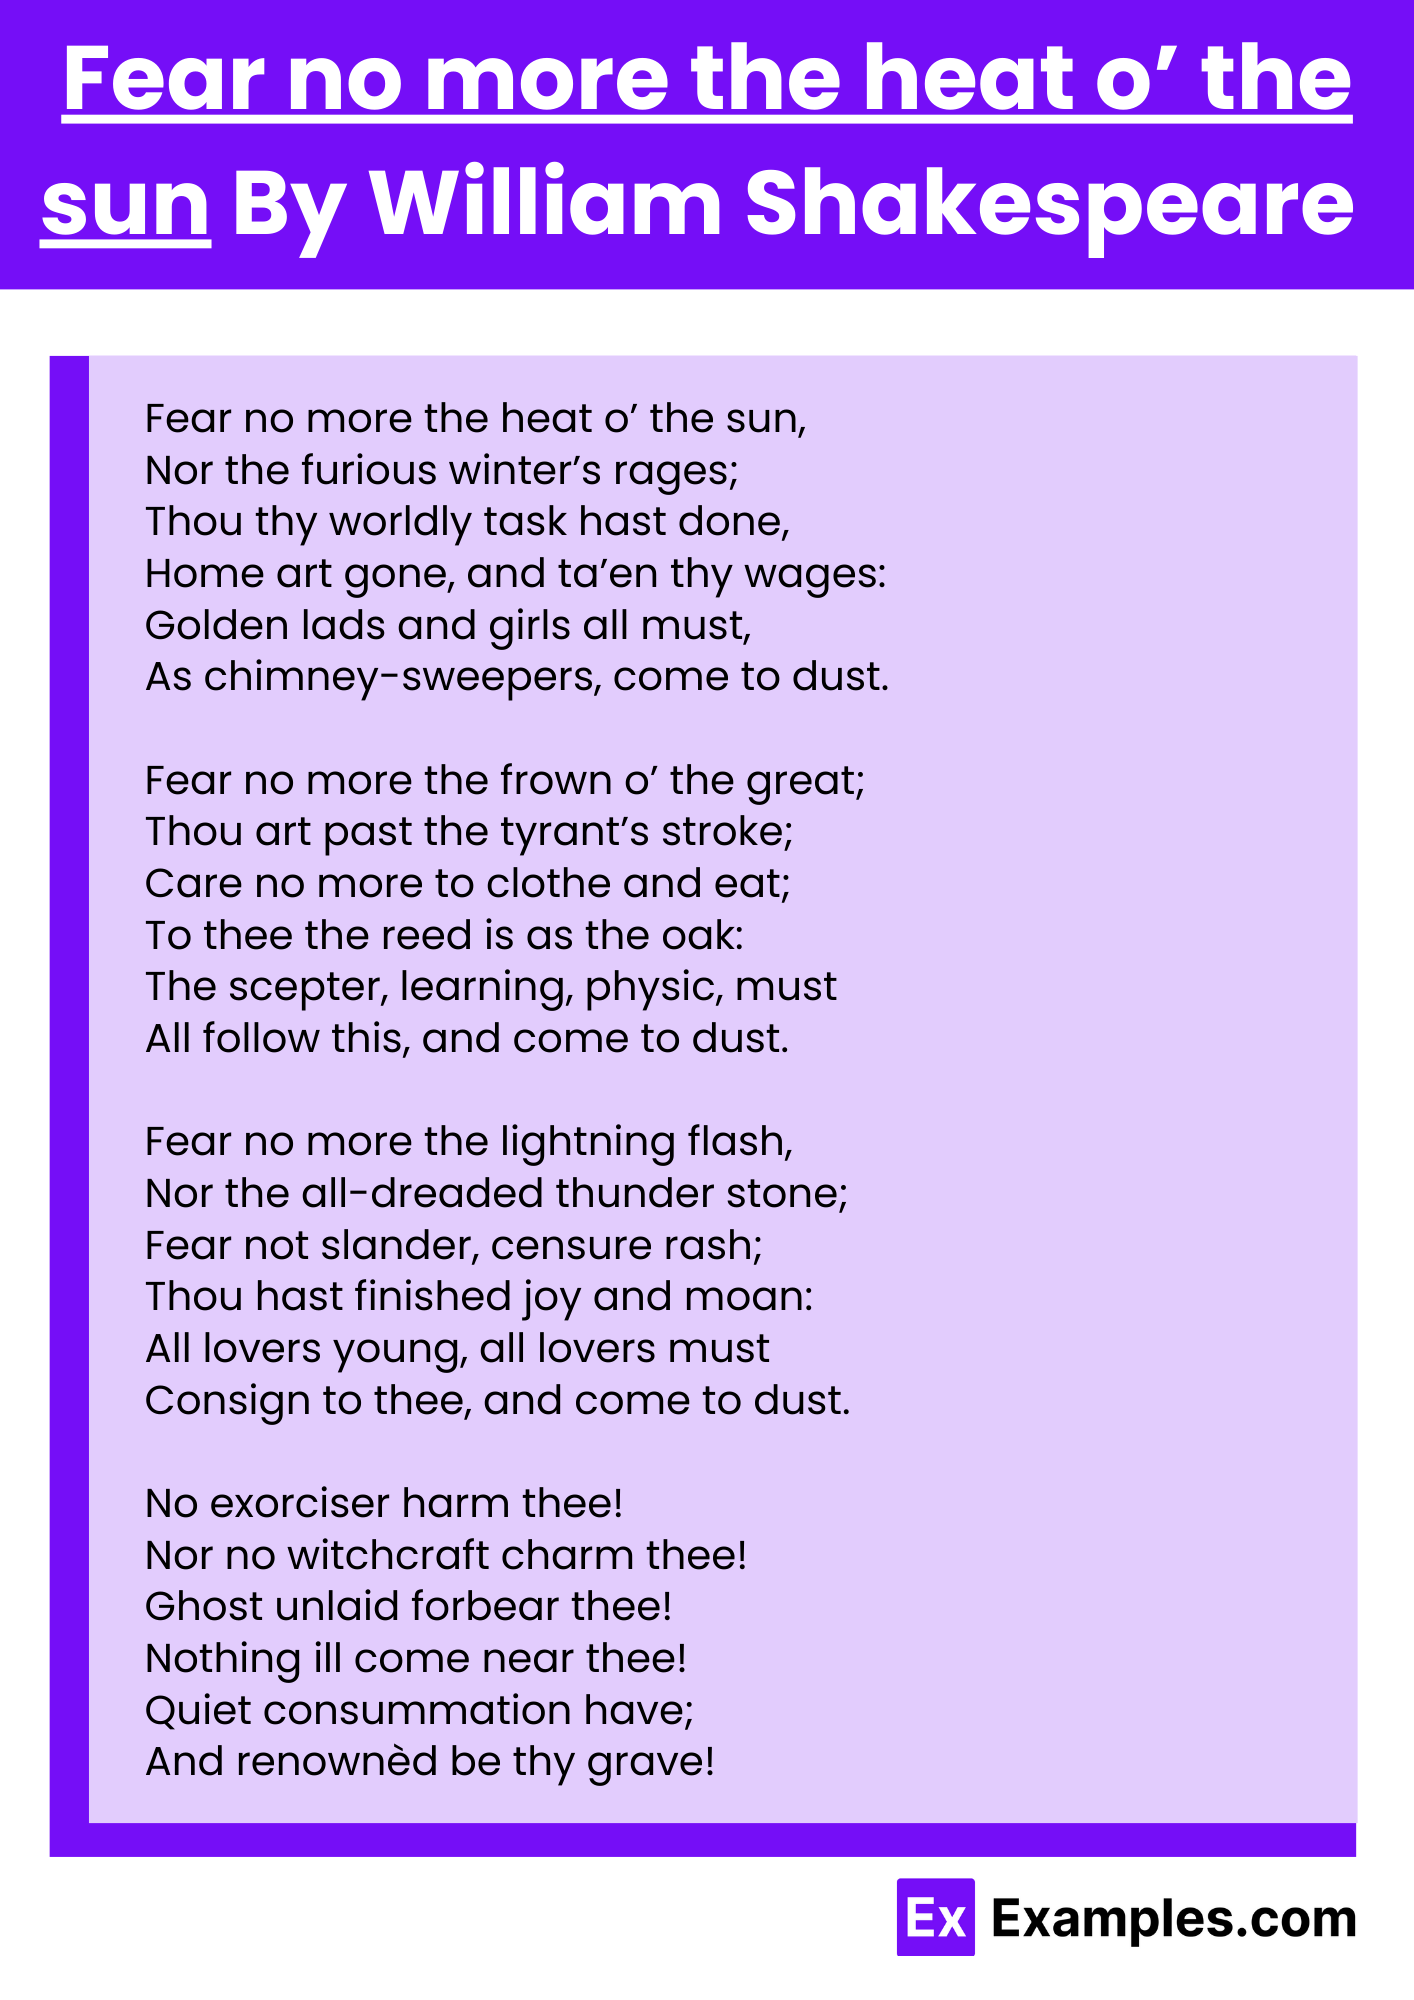 Fear no more the heat o’ the sun By William Shakespeare